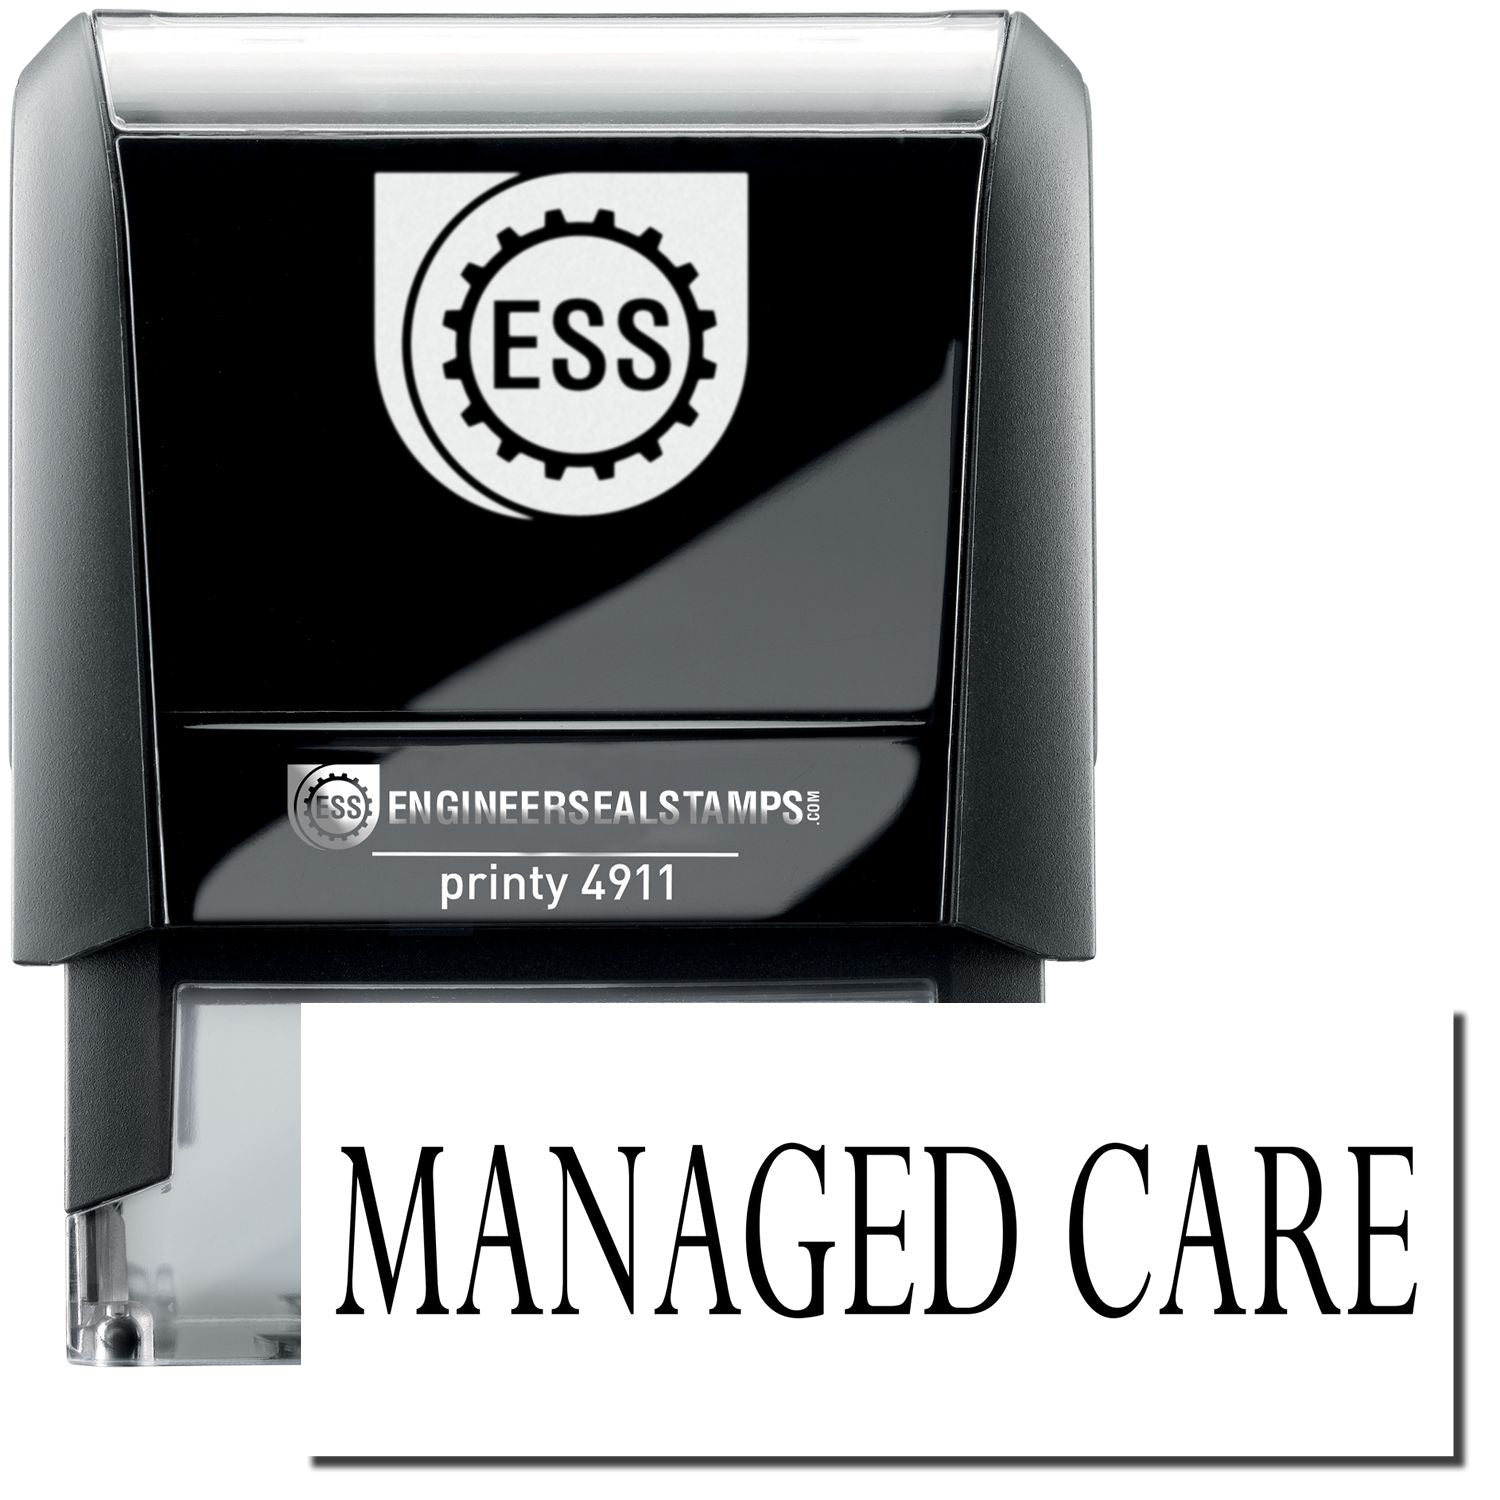 A self-inking stamp with a stamped image showing how the text "MANAGED CARE" is displayed after stamping.